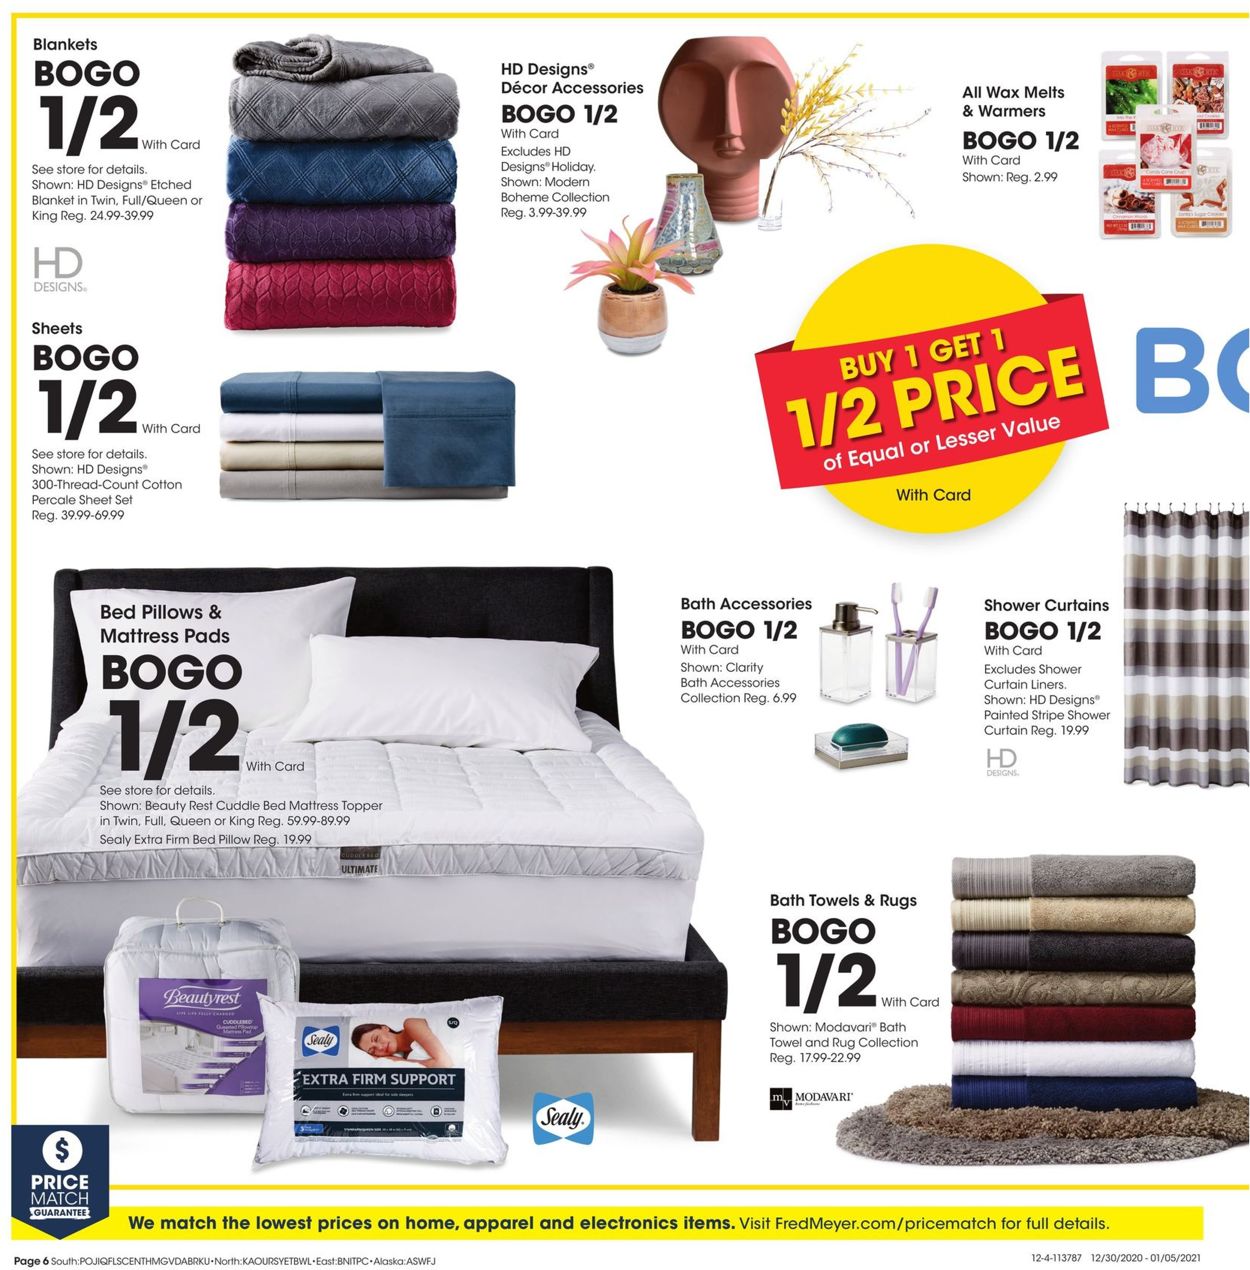 Catalogue Fred Meyer Healthy Home, Healthy You from 12/30/2020